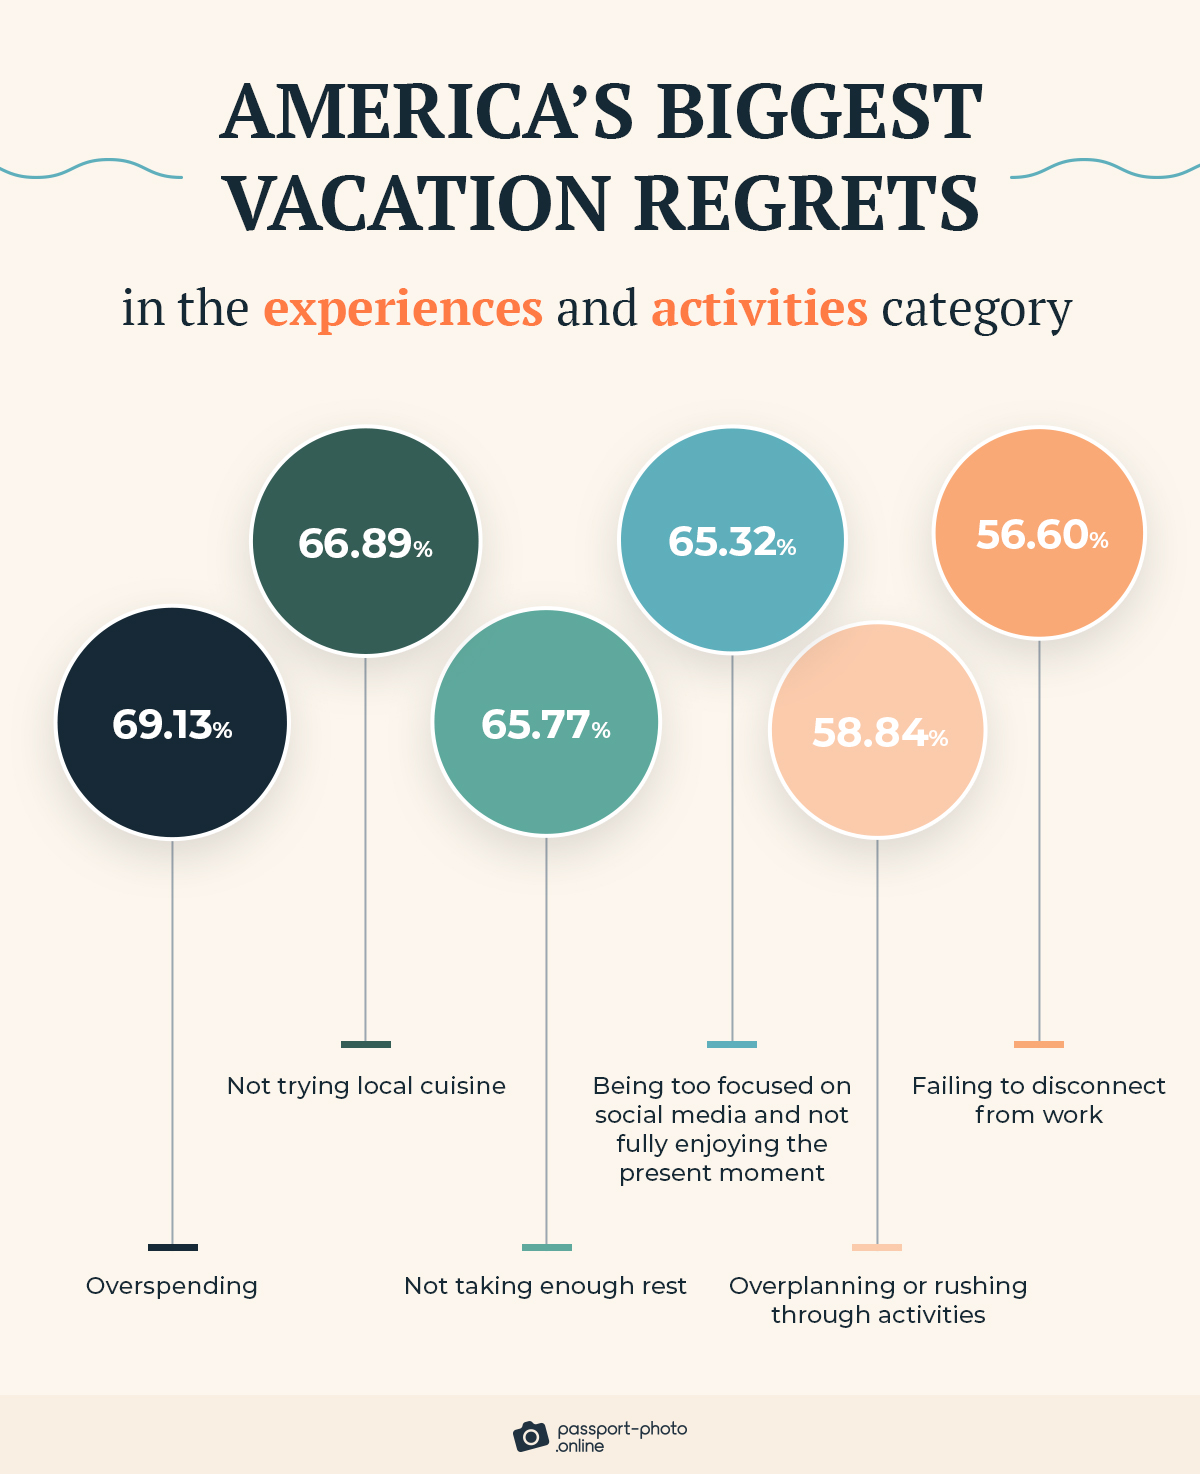 ranking of the biggest vacation regrets in the experiences and activities category